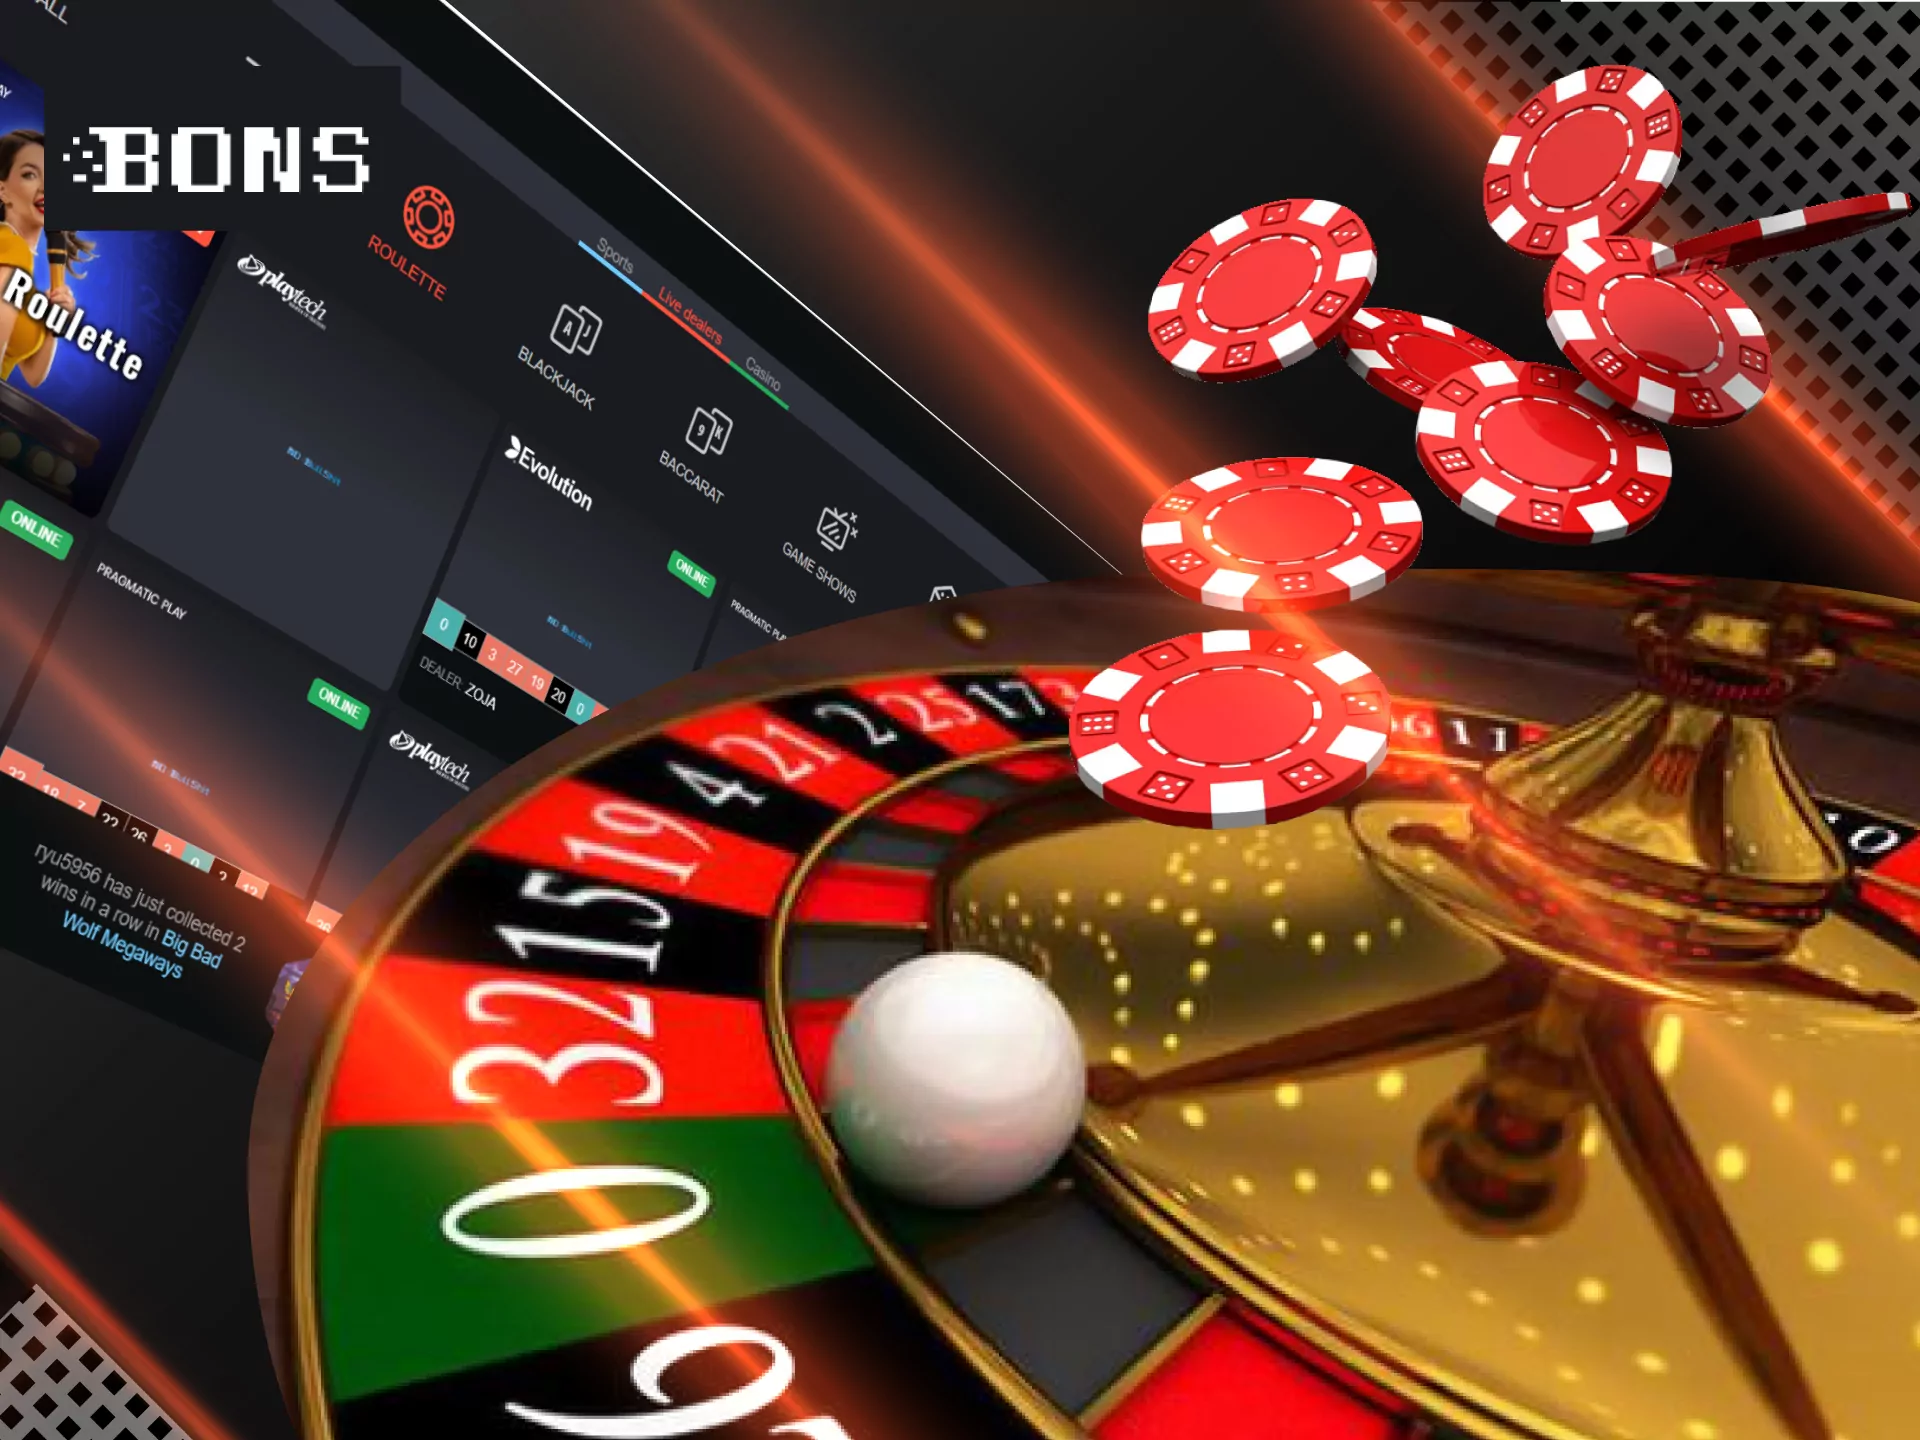 Play live roulettes in the Bons casino.